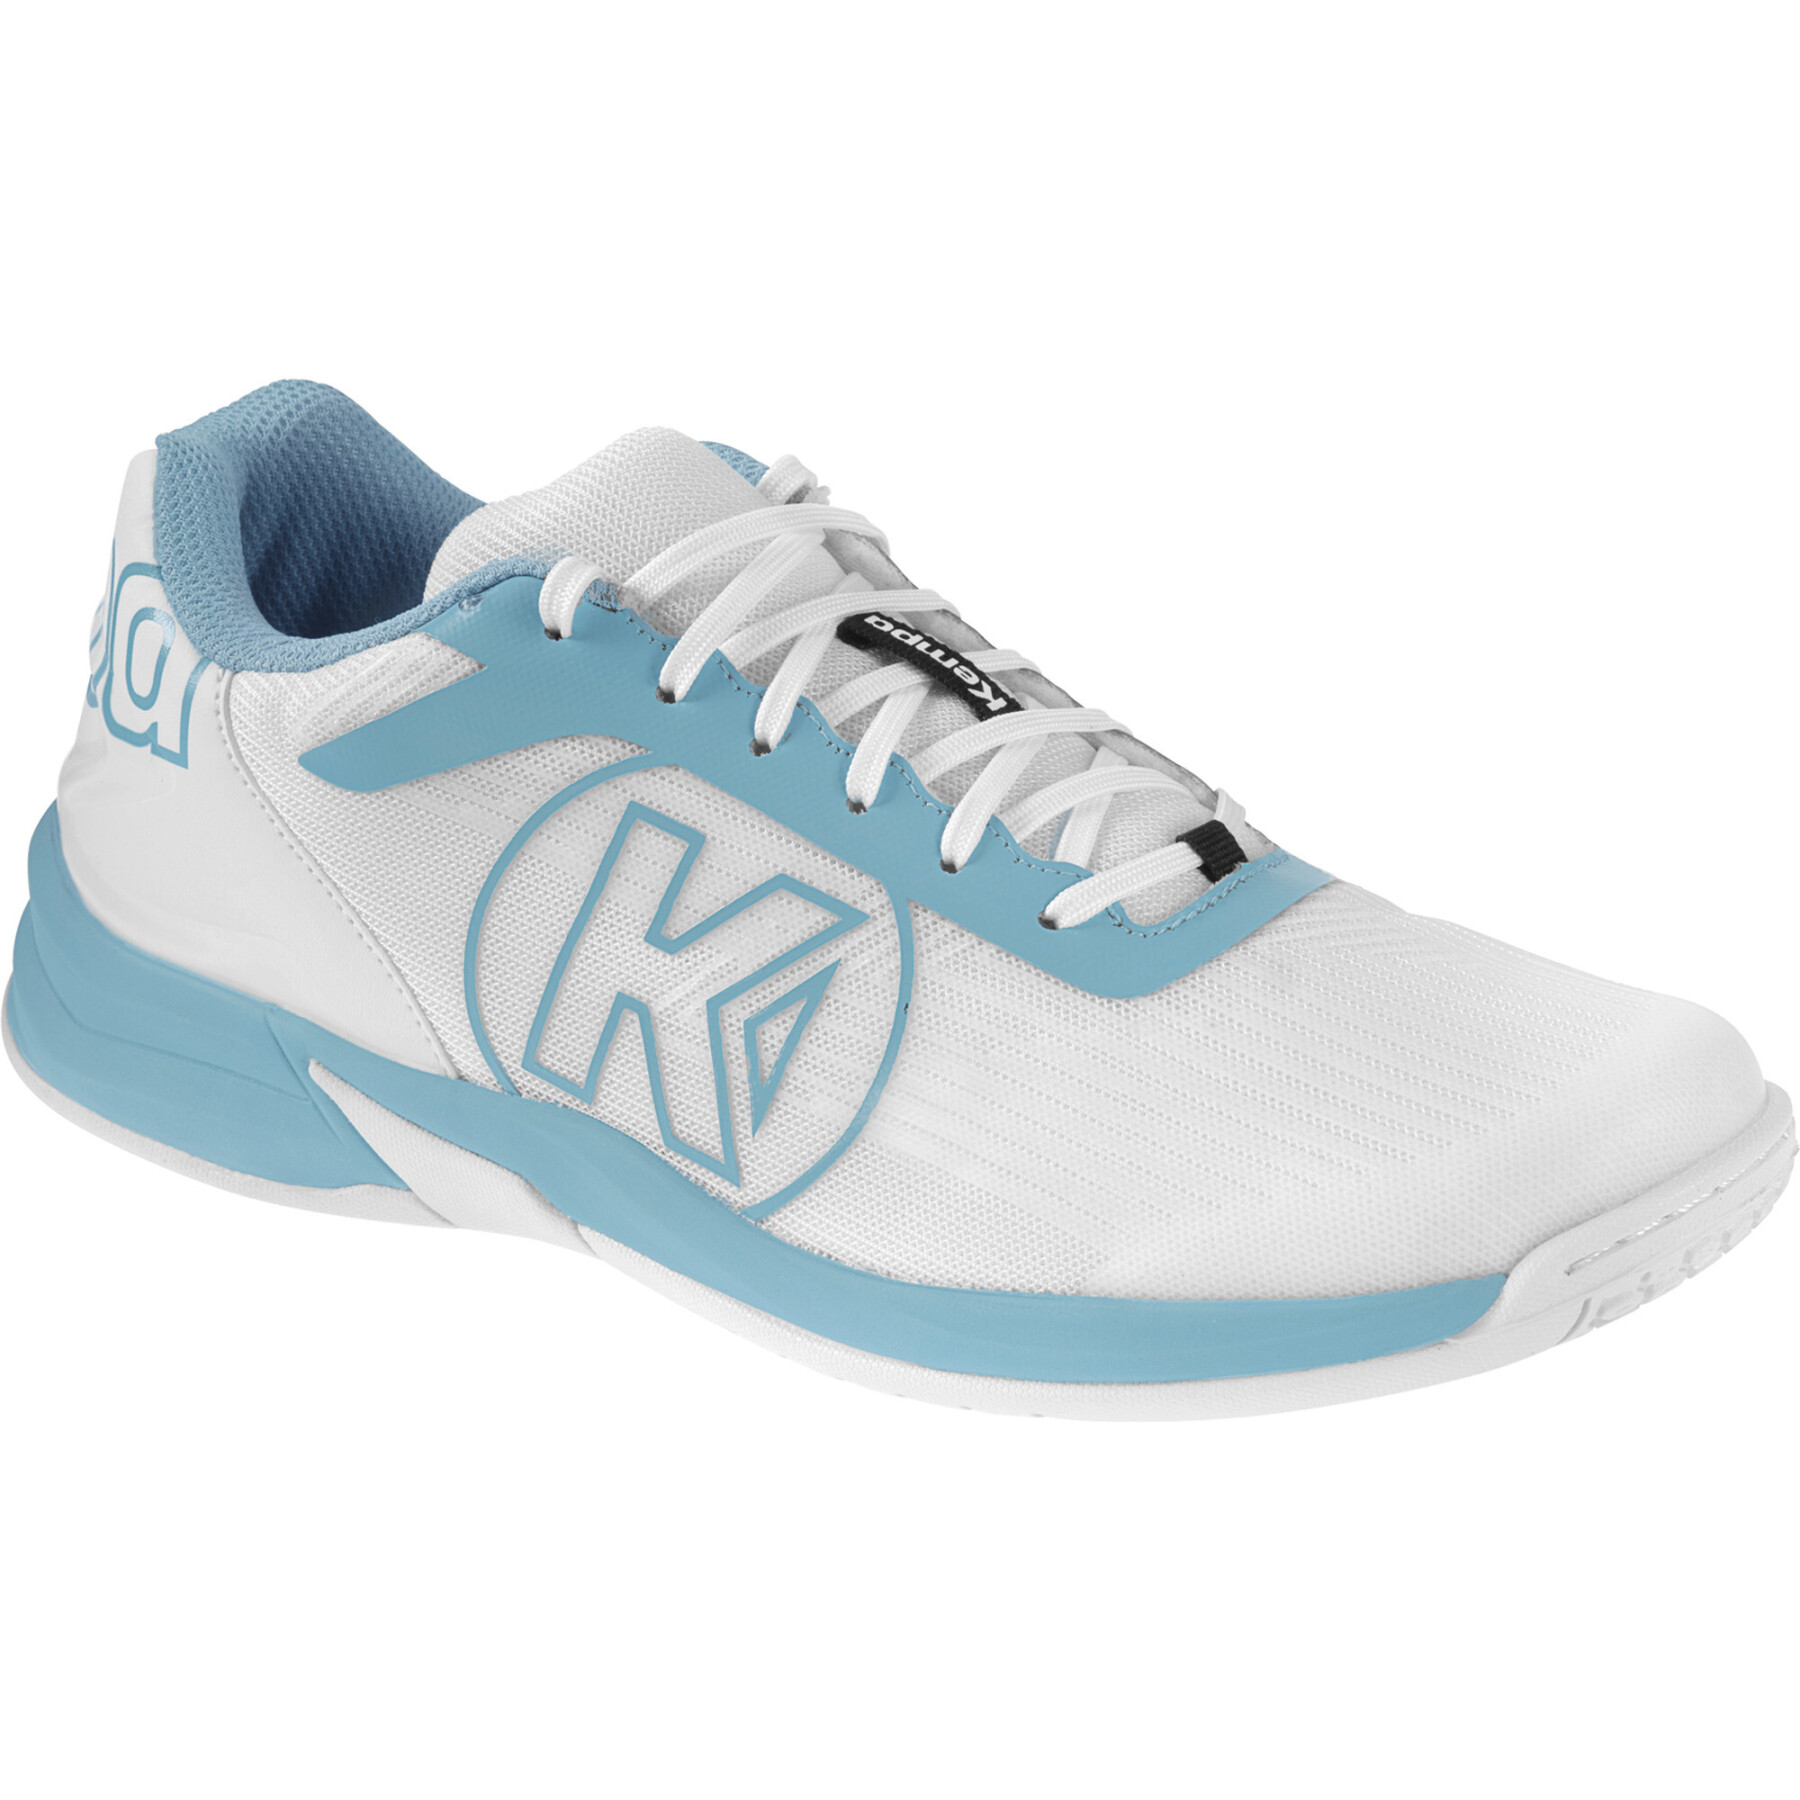 Women's indoor shoes Kempa Attack Three 2.0 Game Changer